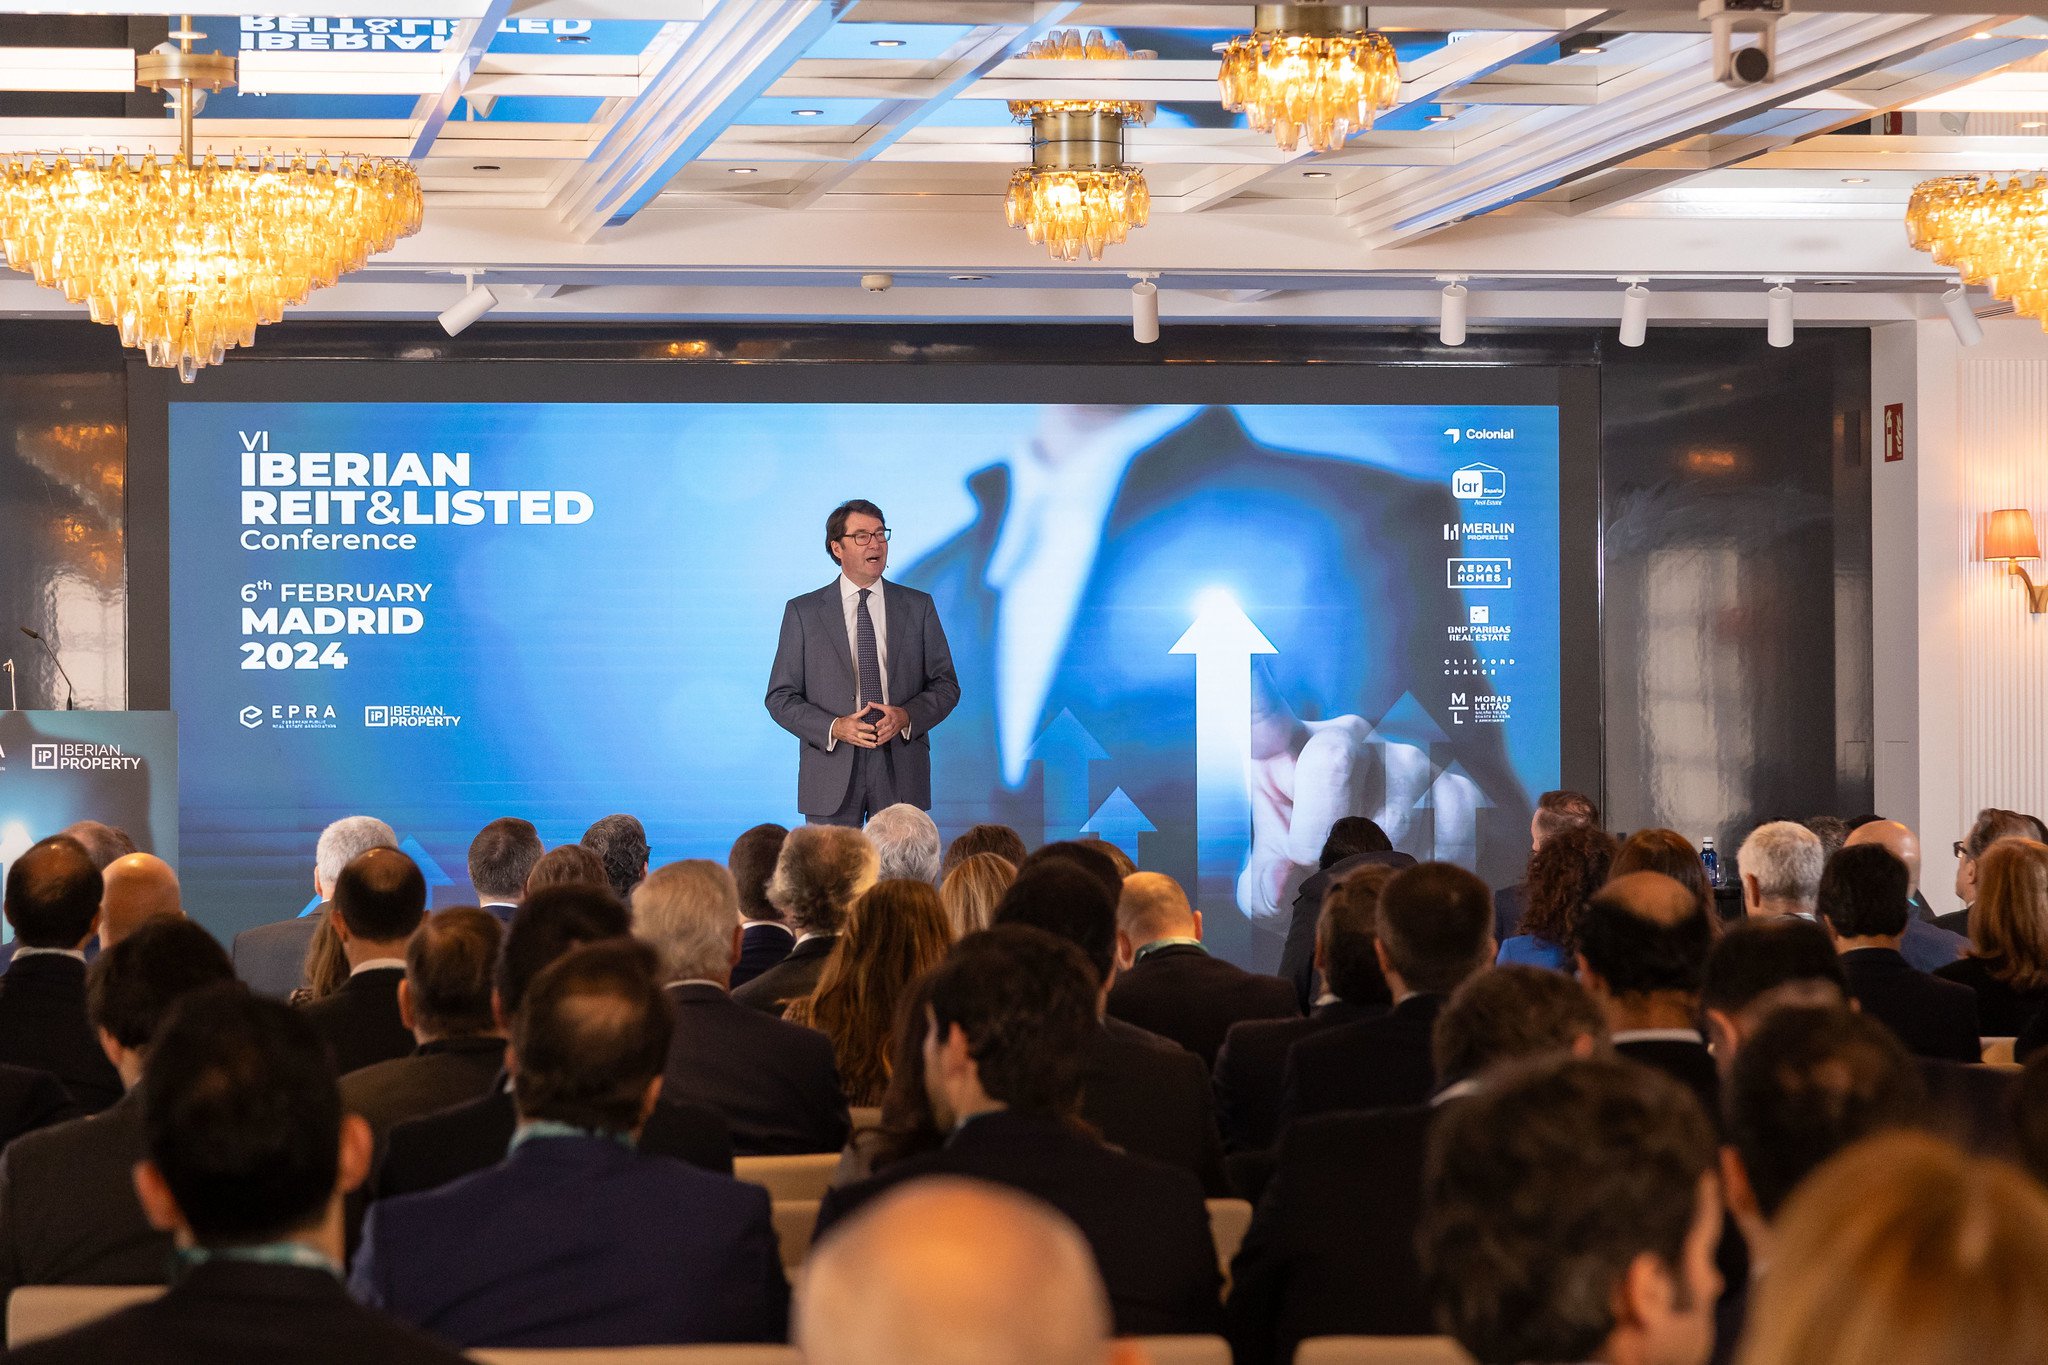 VI REIT & LISTED CONFERENCE, MADRID 2024